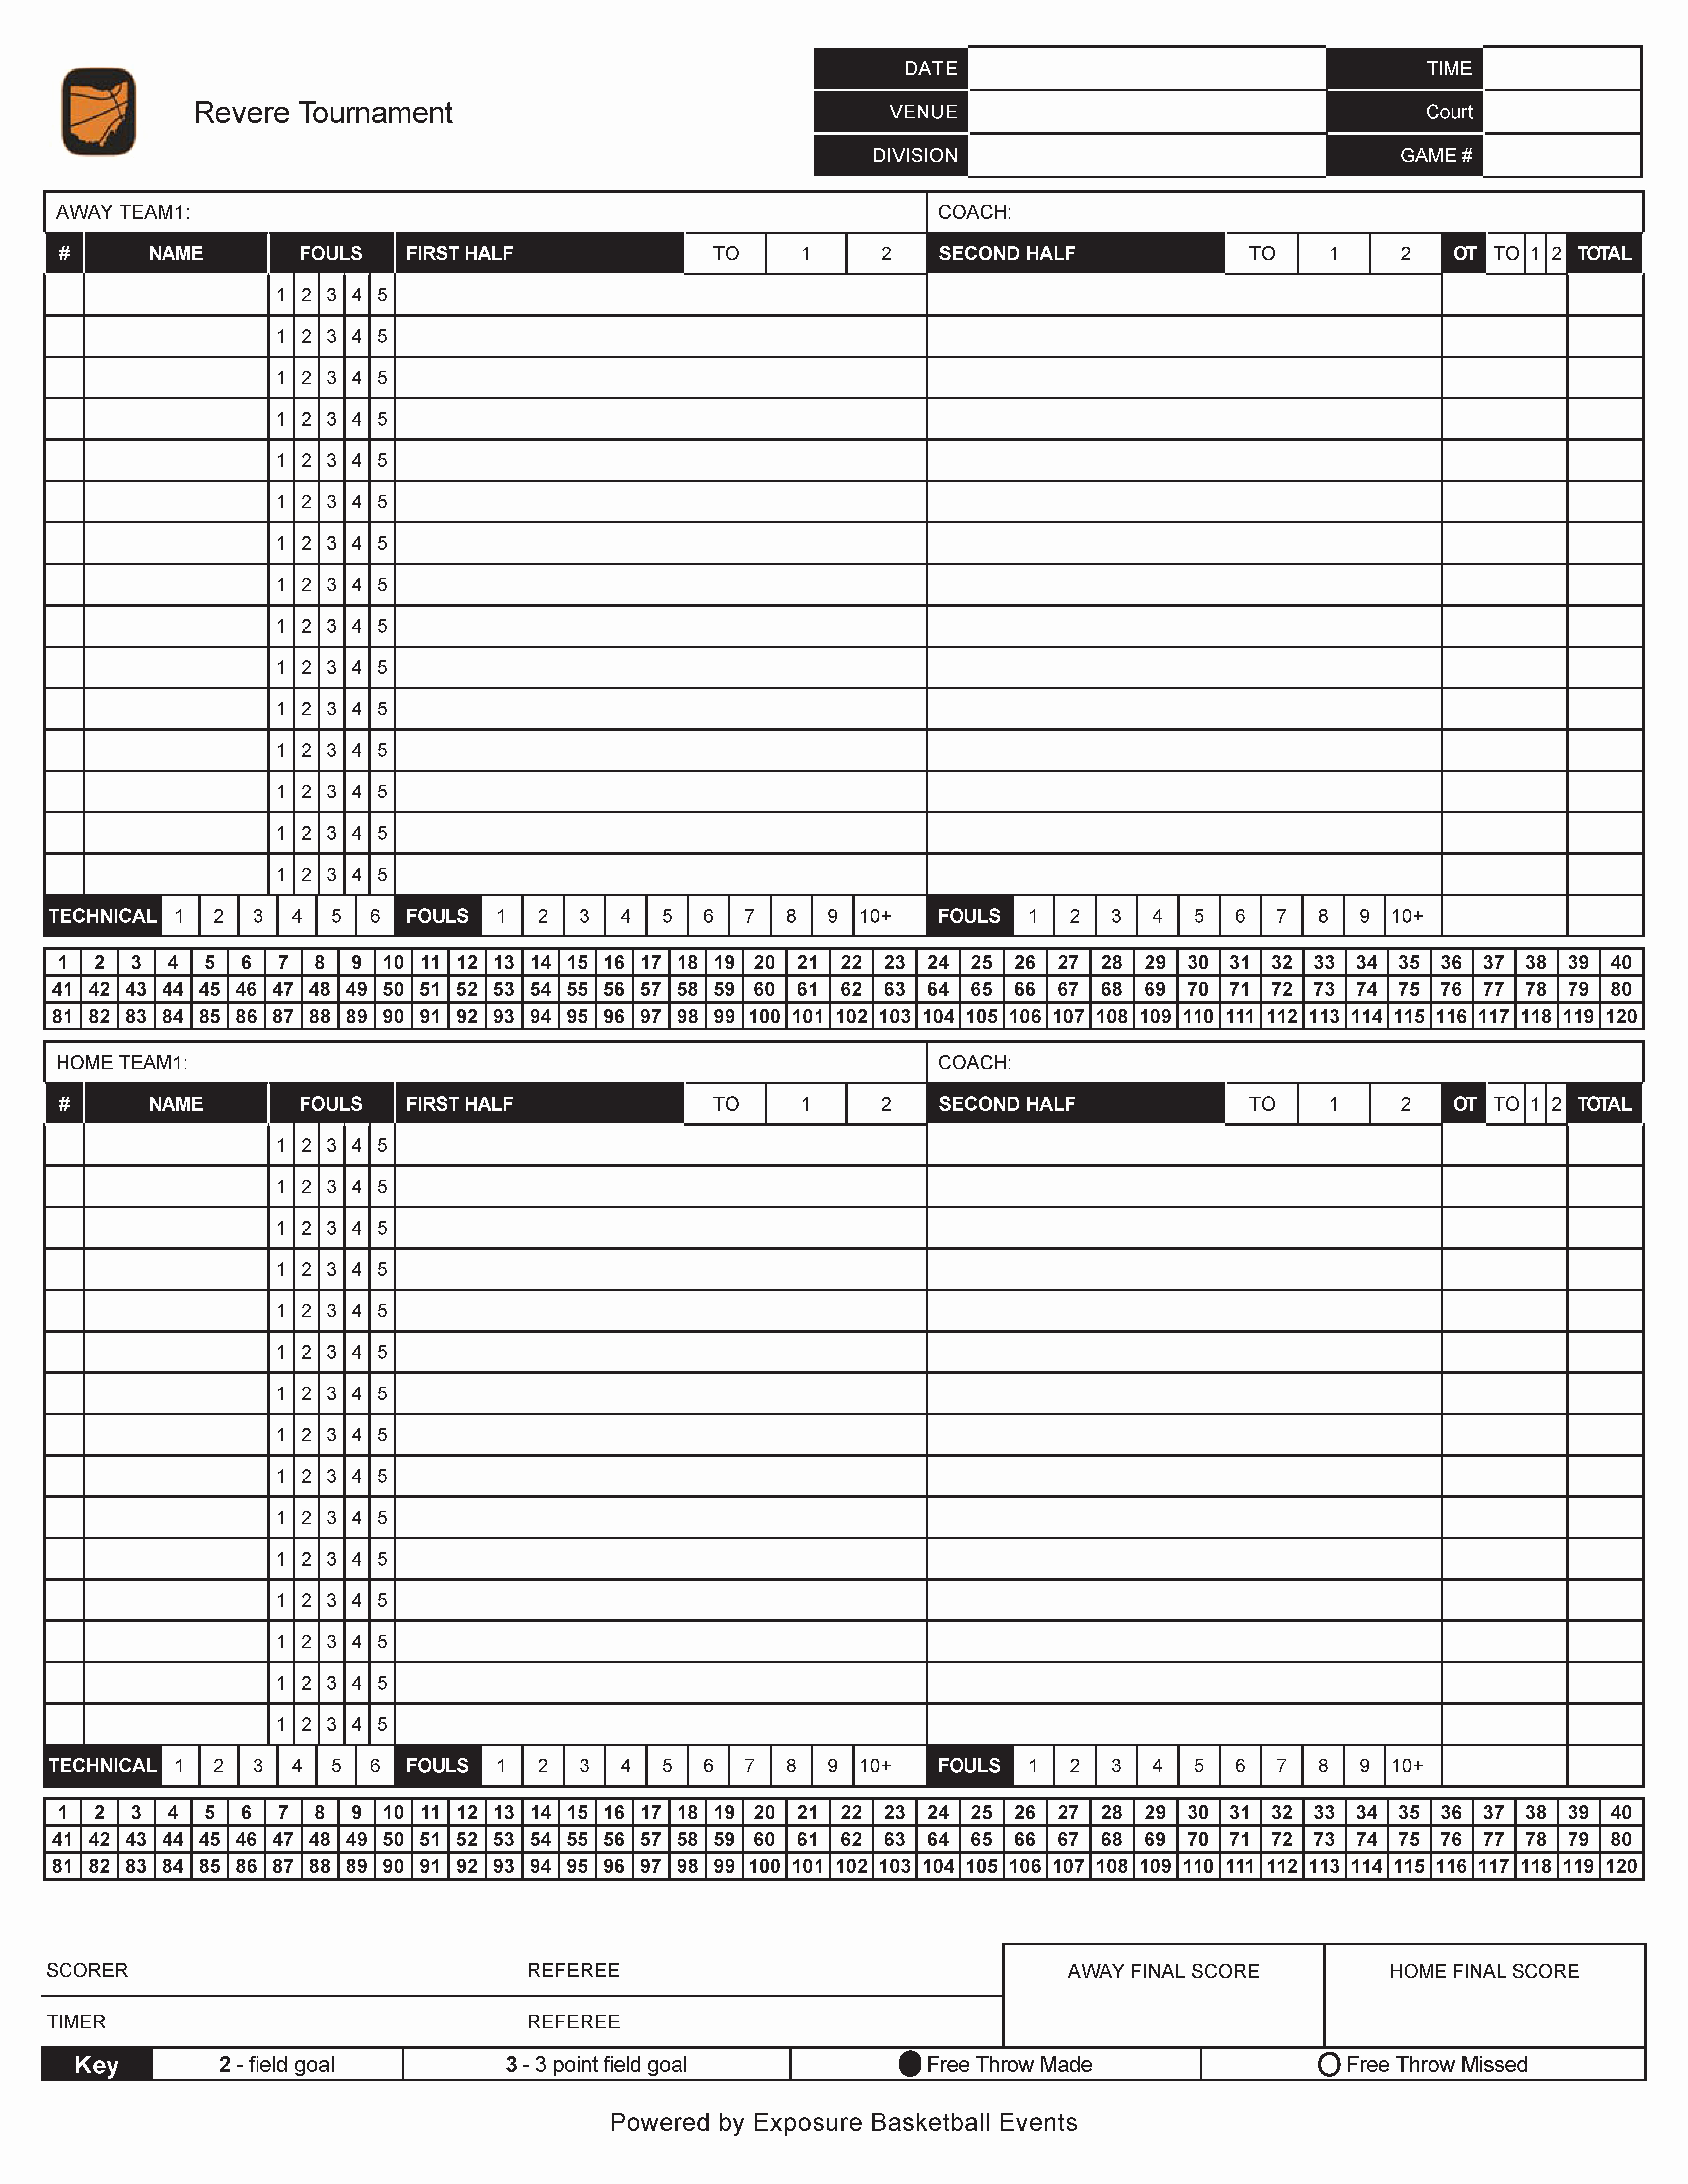 Concession Stand Price List Template Fresh Volunteers – Revere Celebration tournament